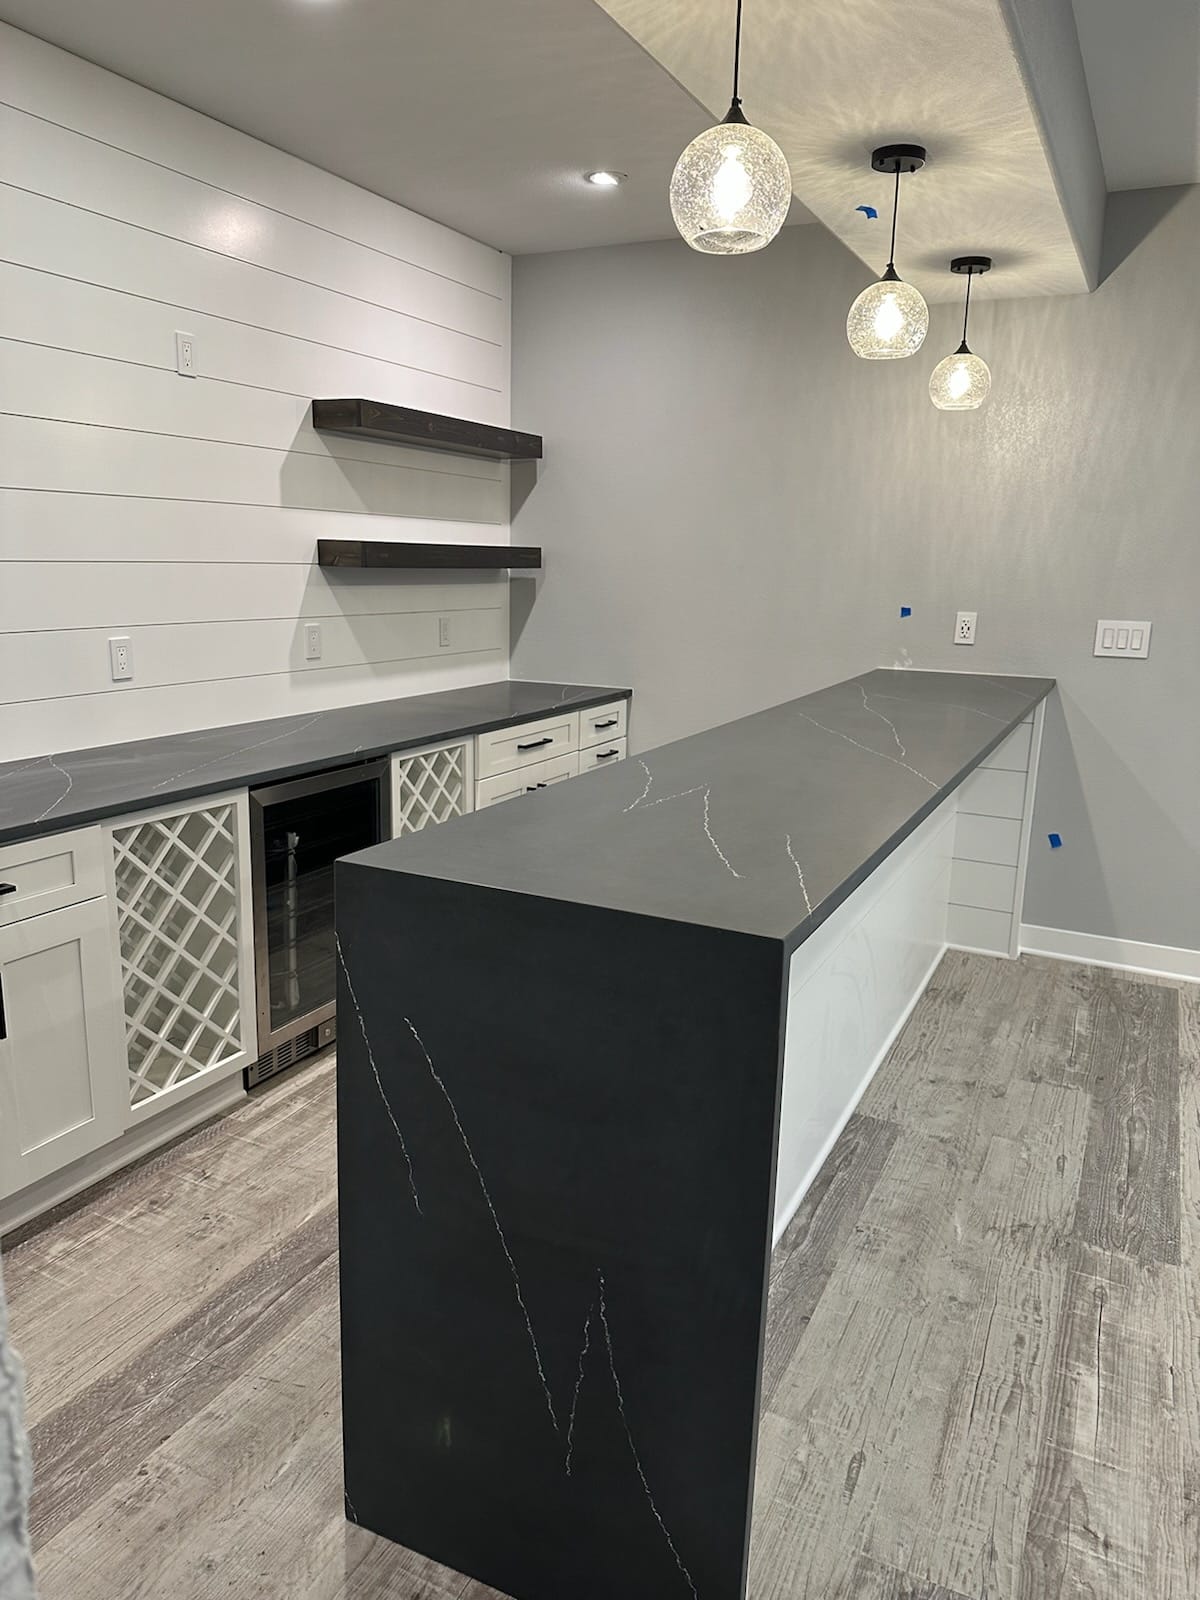  Best kitchen remodeling company in Arlington Heights, IL - Stone Cabinet Works